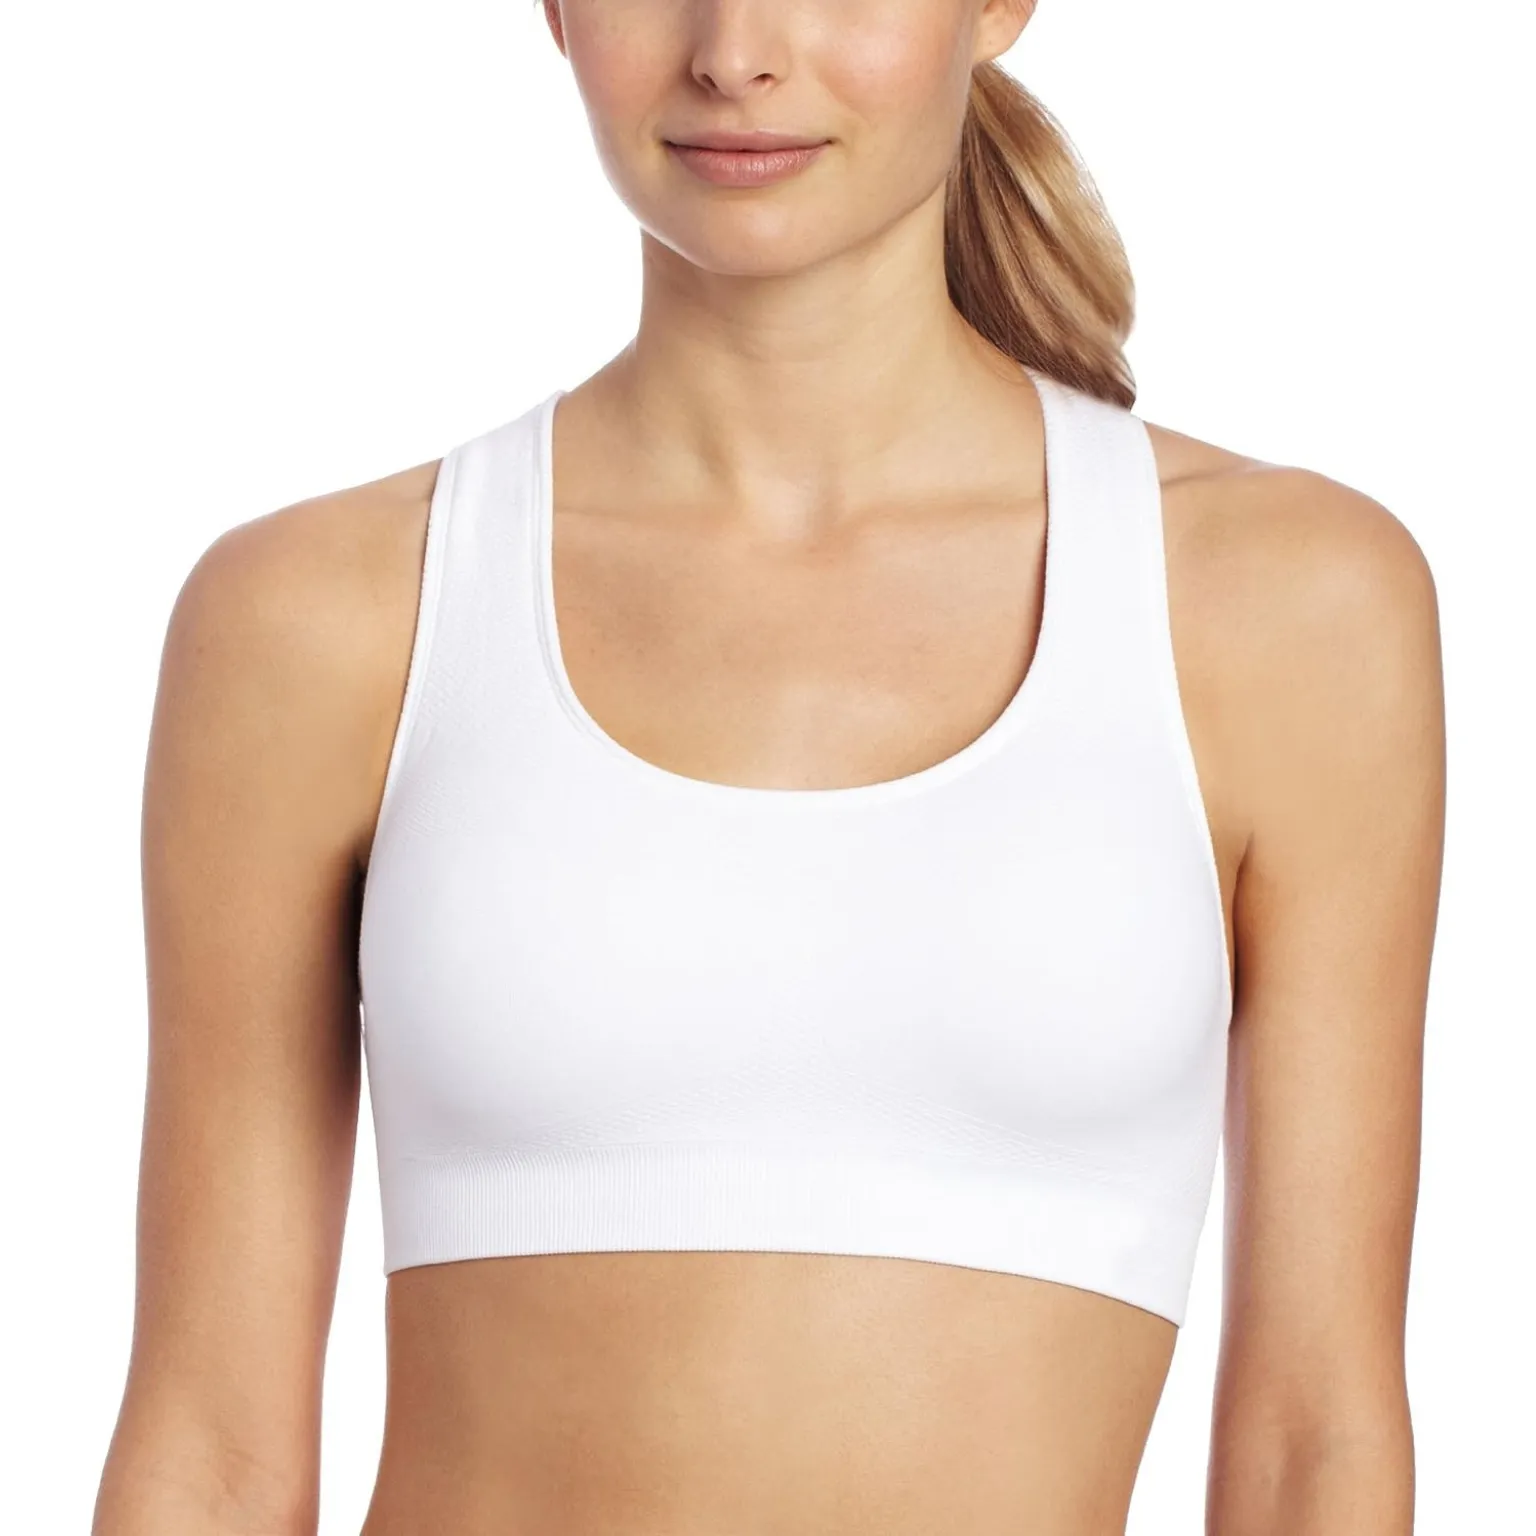 Gym Bra Manufacturing with superior quality